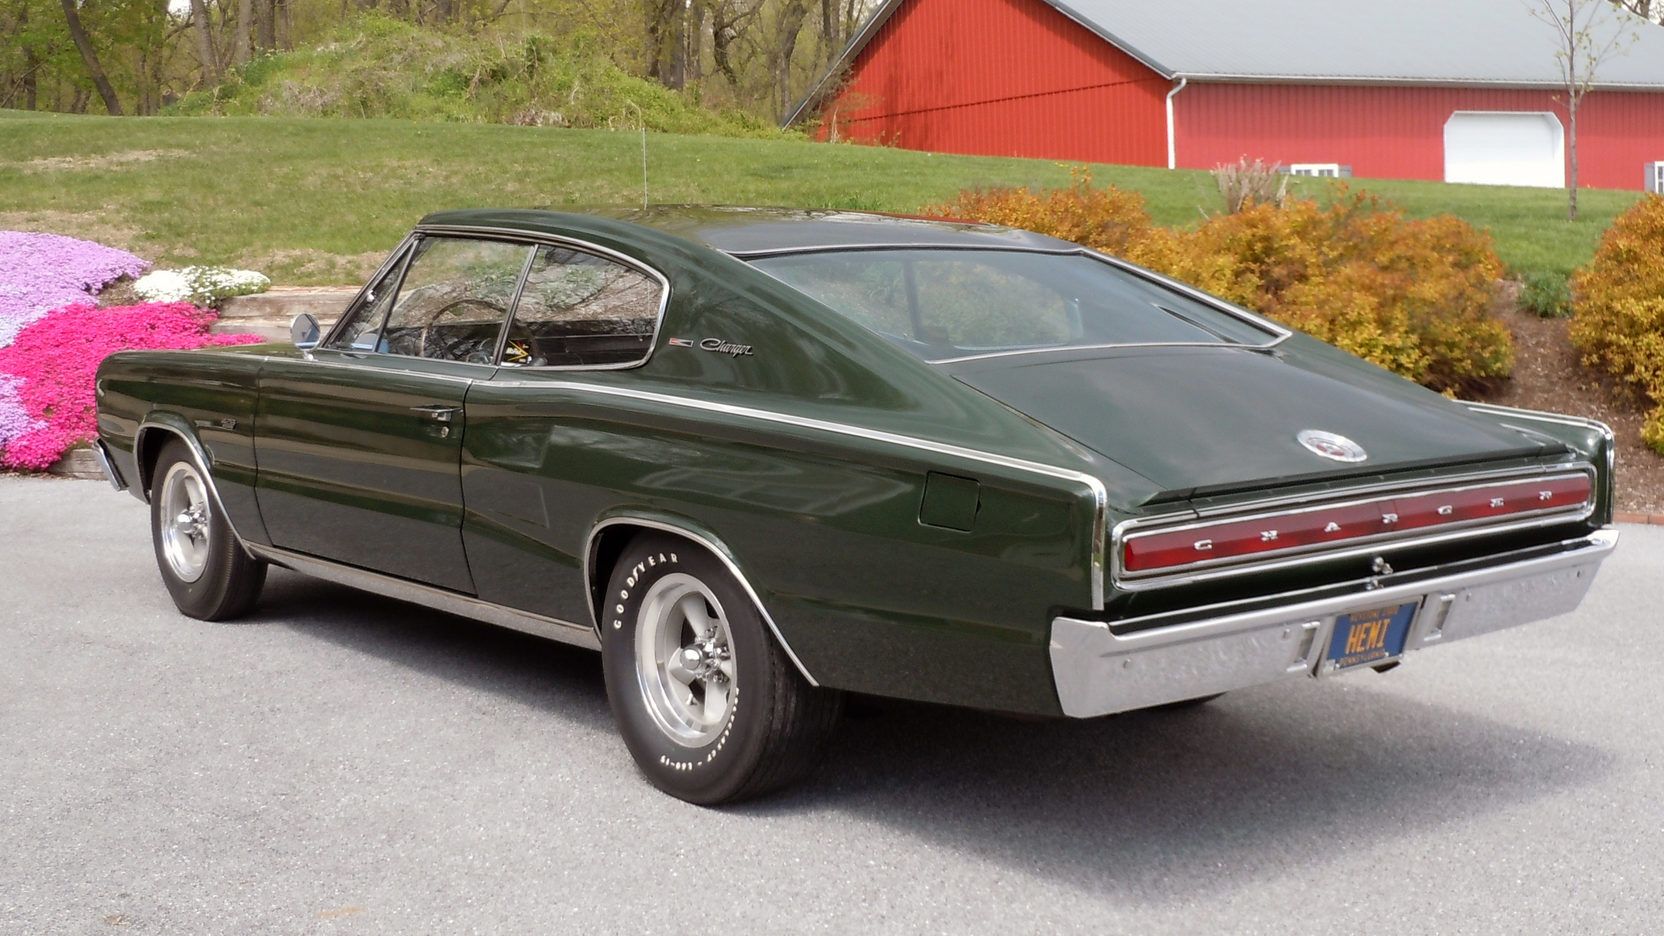 Green Dodge Charger 426 HEMI from 1966